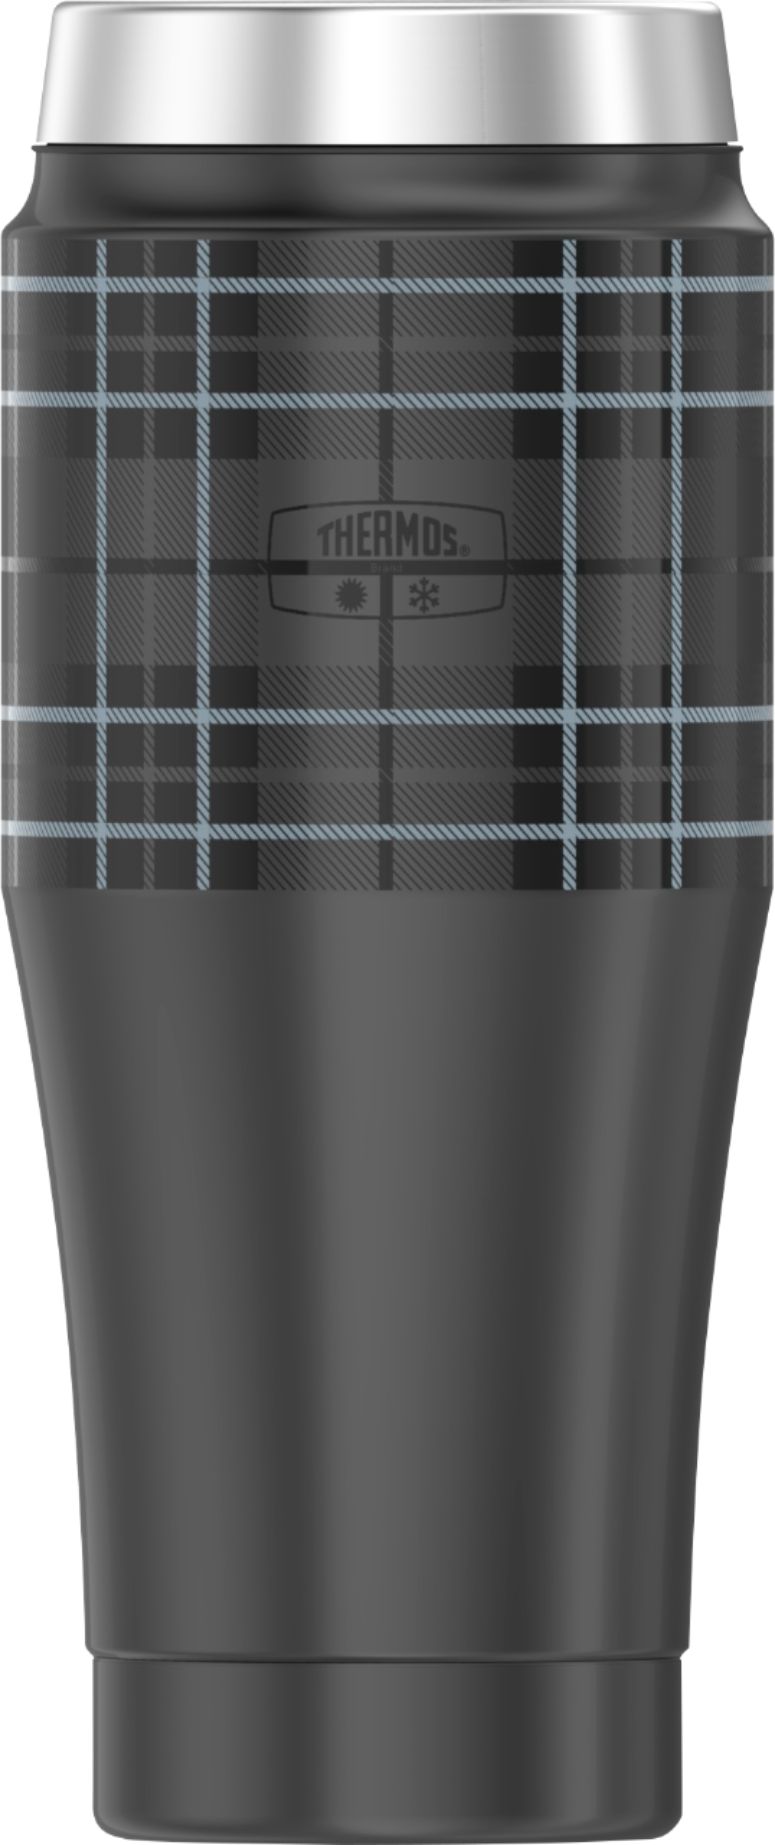 Thermos Tumbler, Double Wall, 16 Ounce, Drinkware